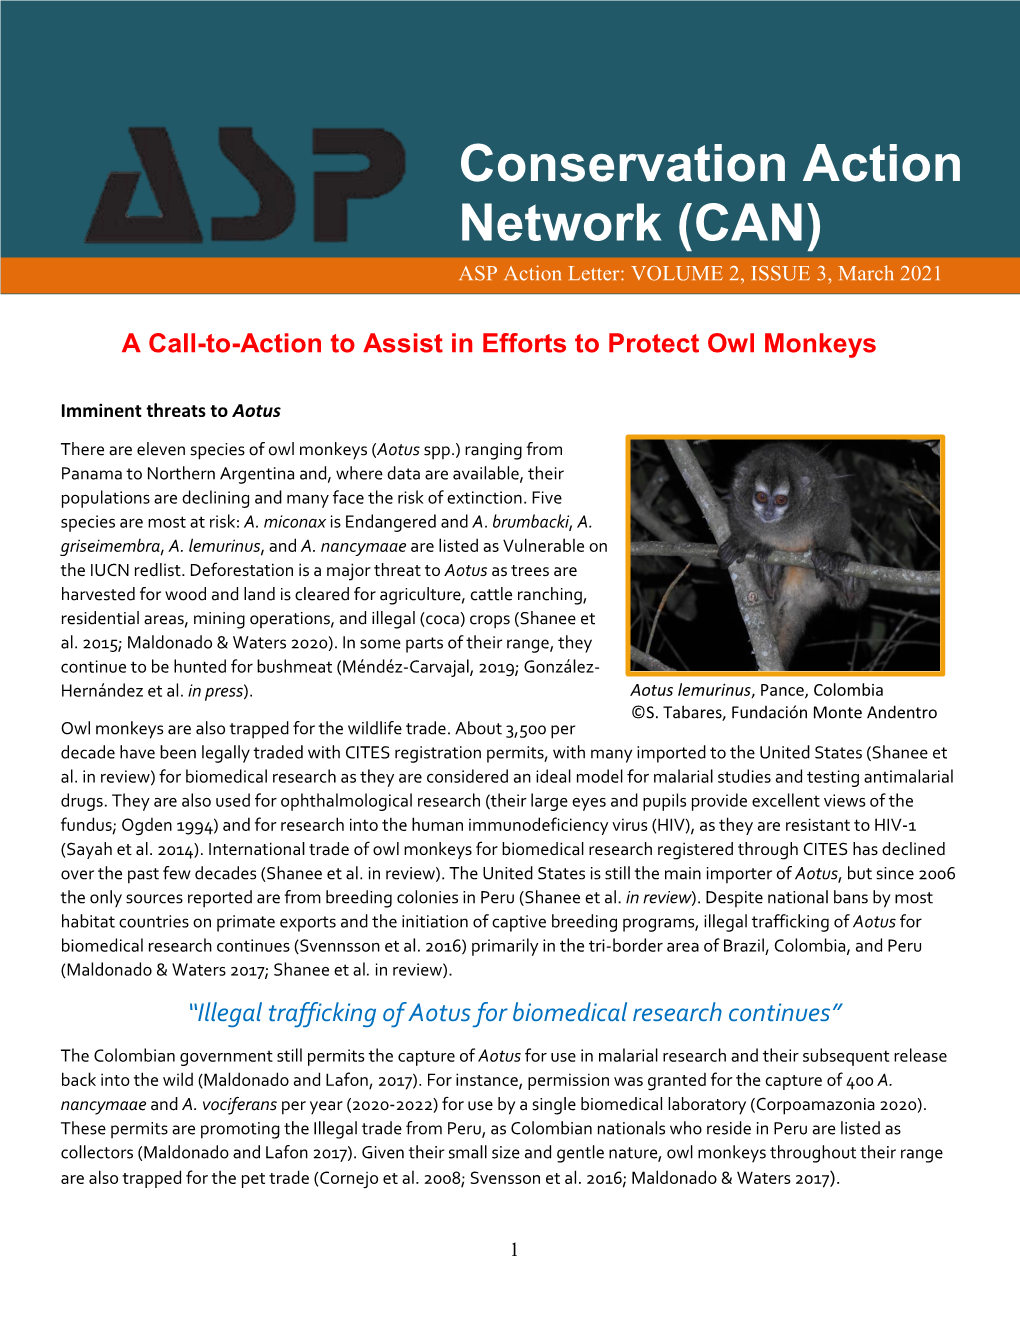 Conservation Action Network (CAN) ASP Action Letter: VOLUME 2, ISSUE 3, March 2021